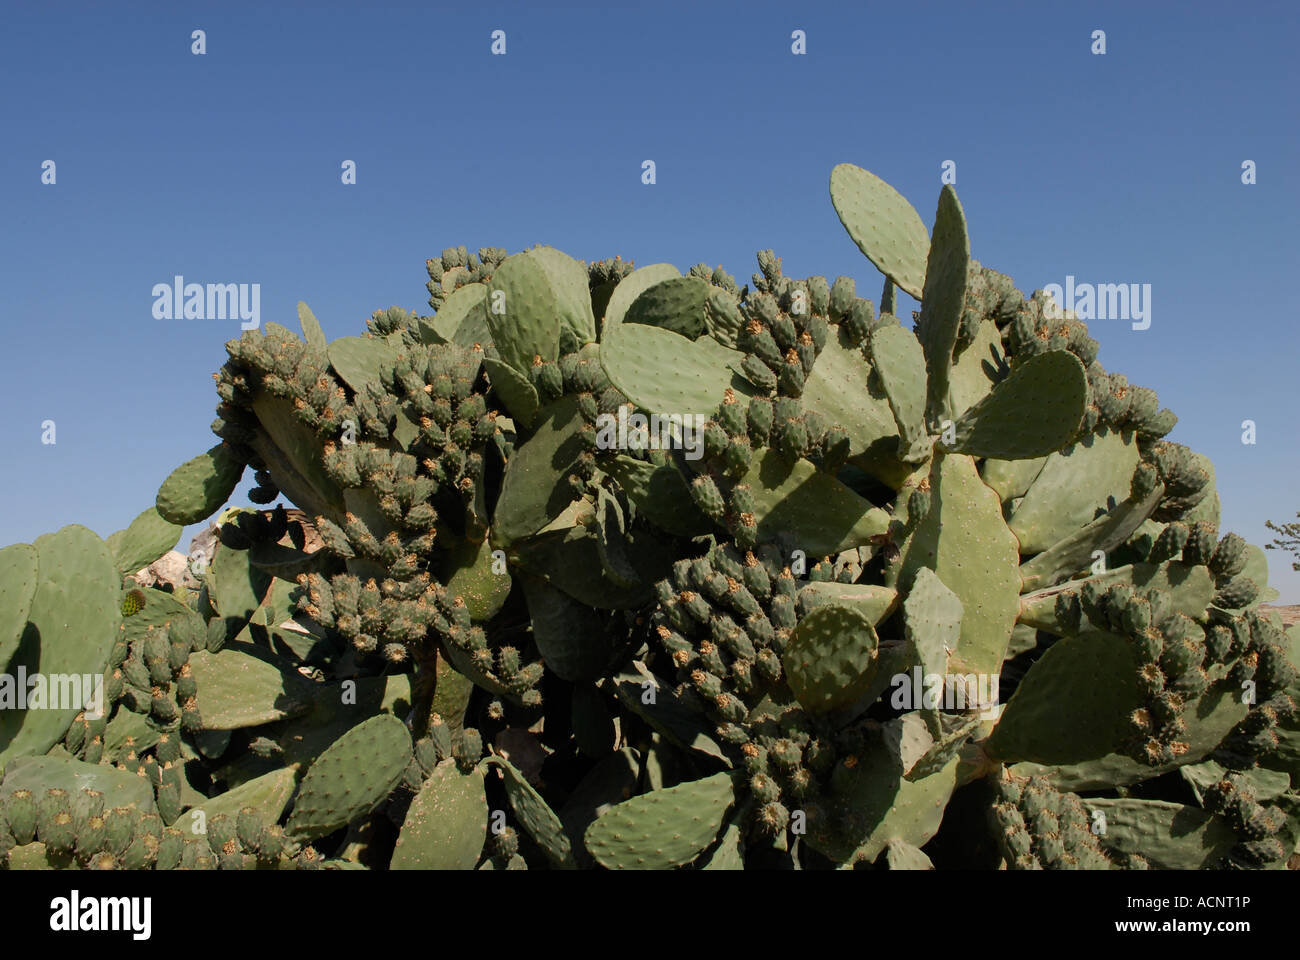 Prickly pear Opuntia cactus West Bank Israel Stock Photo